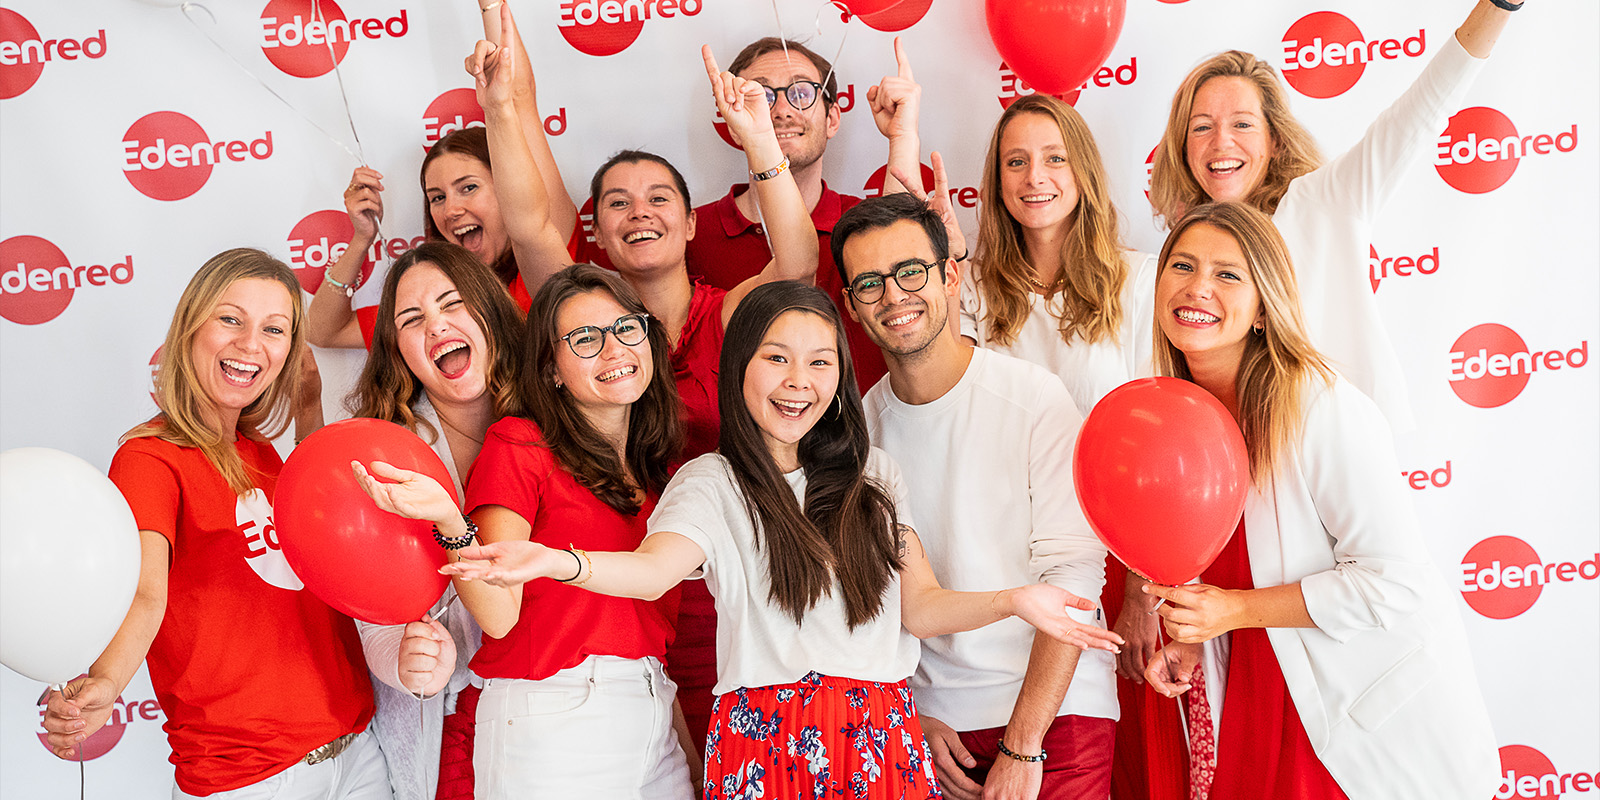 People standing in front of the Edenred fabric holding red balloons